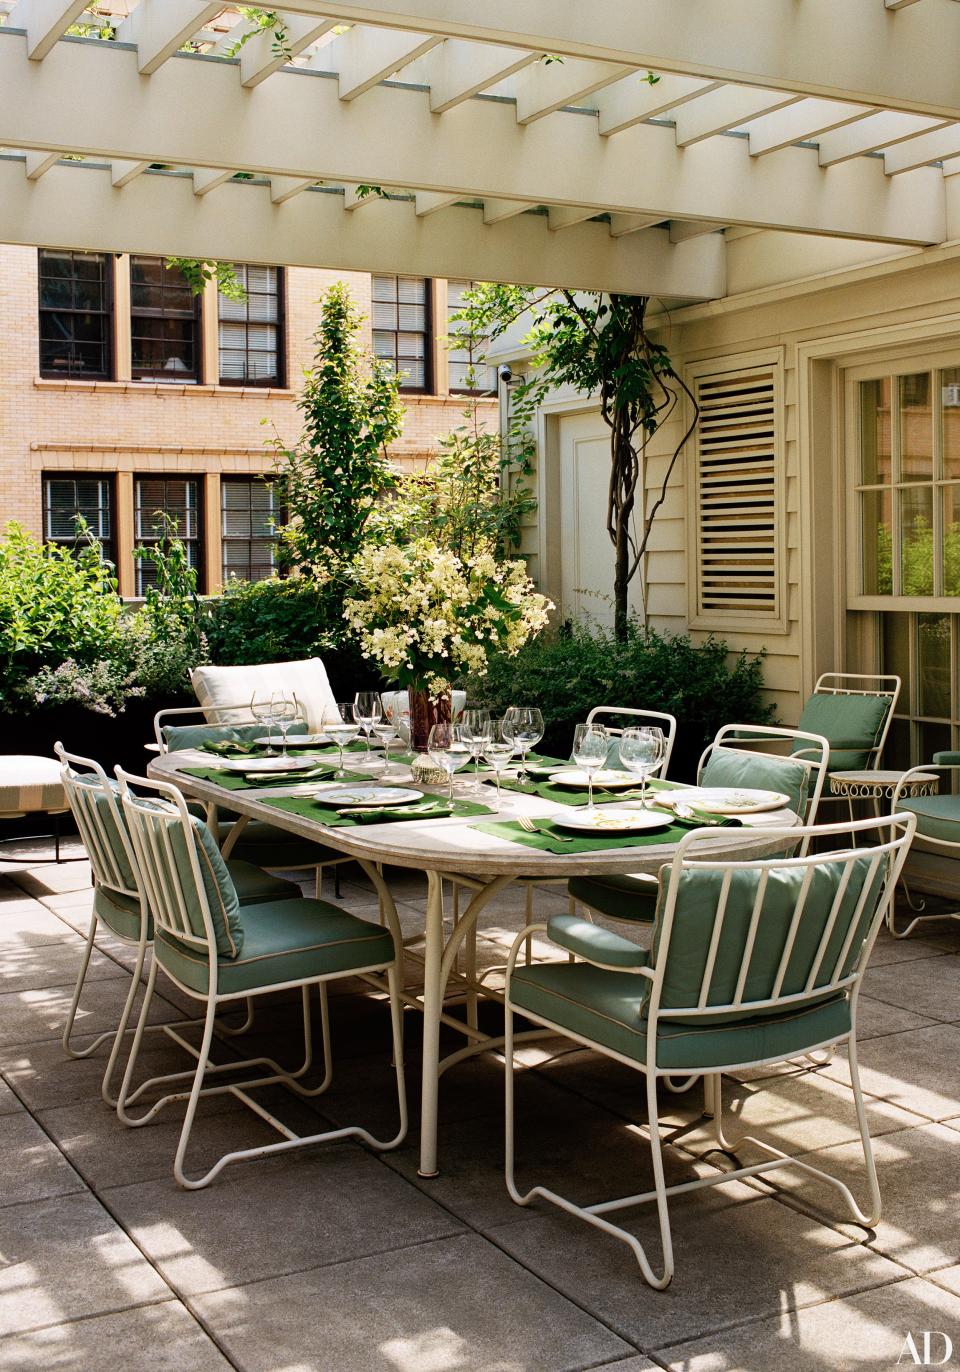 The outdoor space at Marc Jacobs’s New York City townhouse.